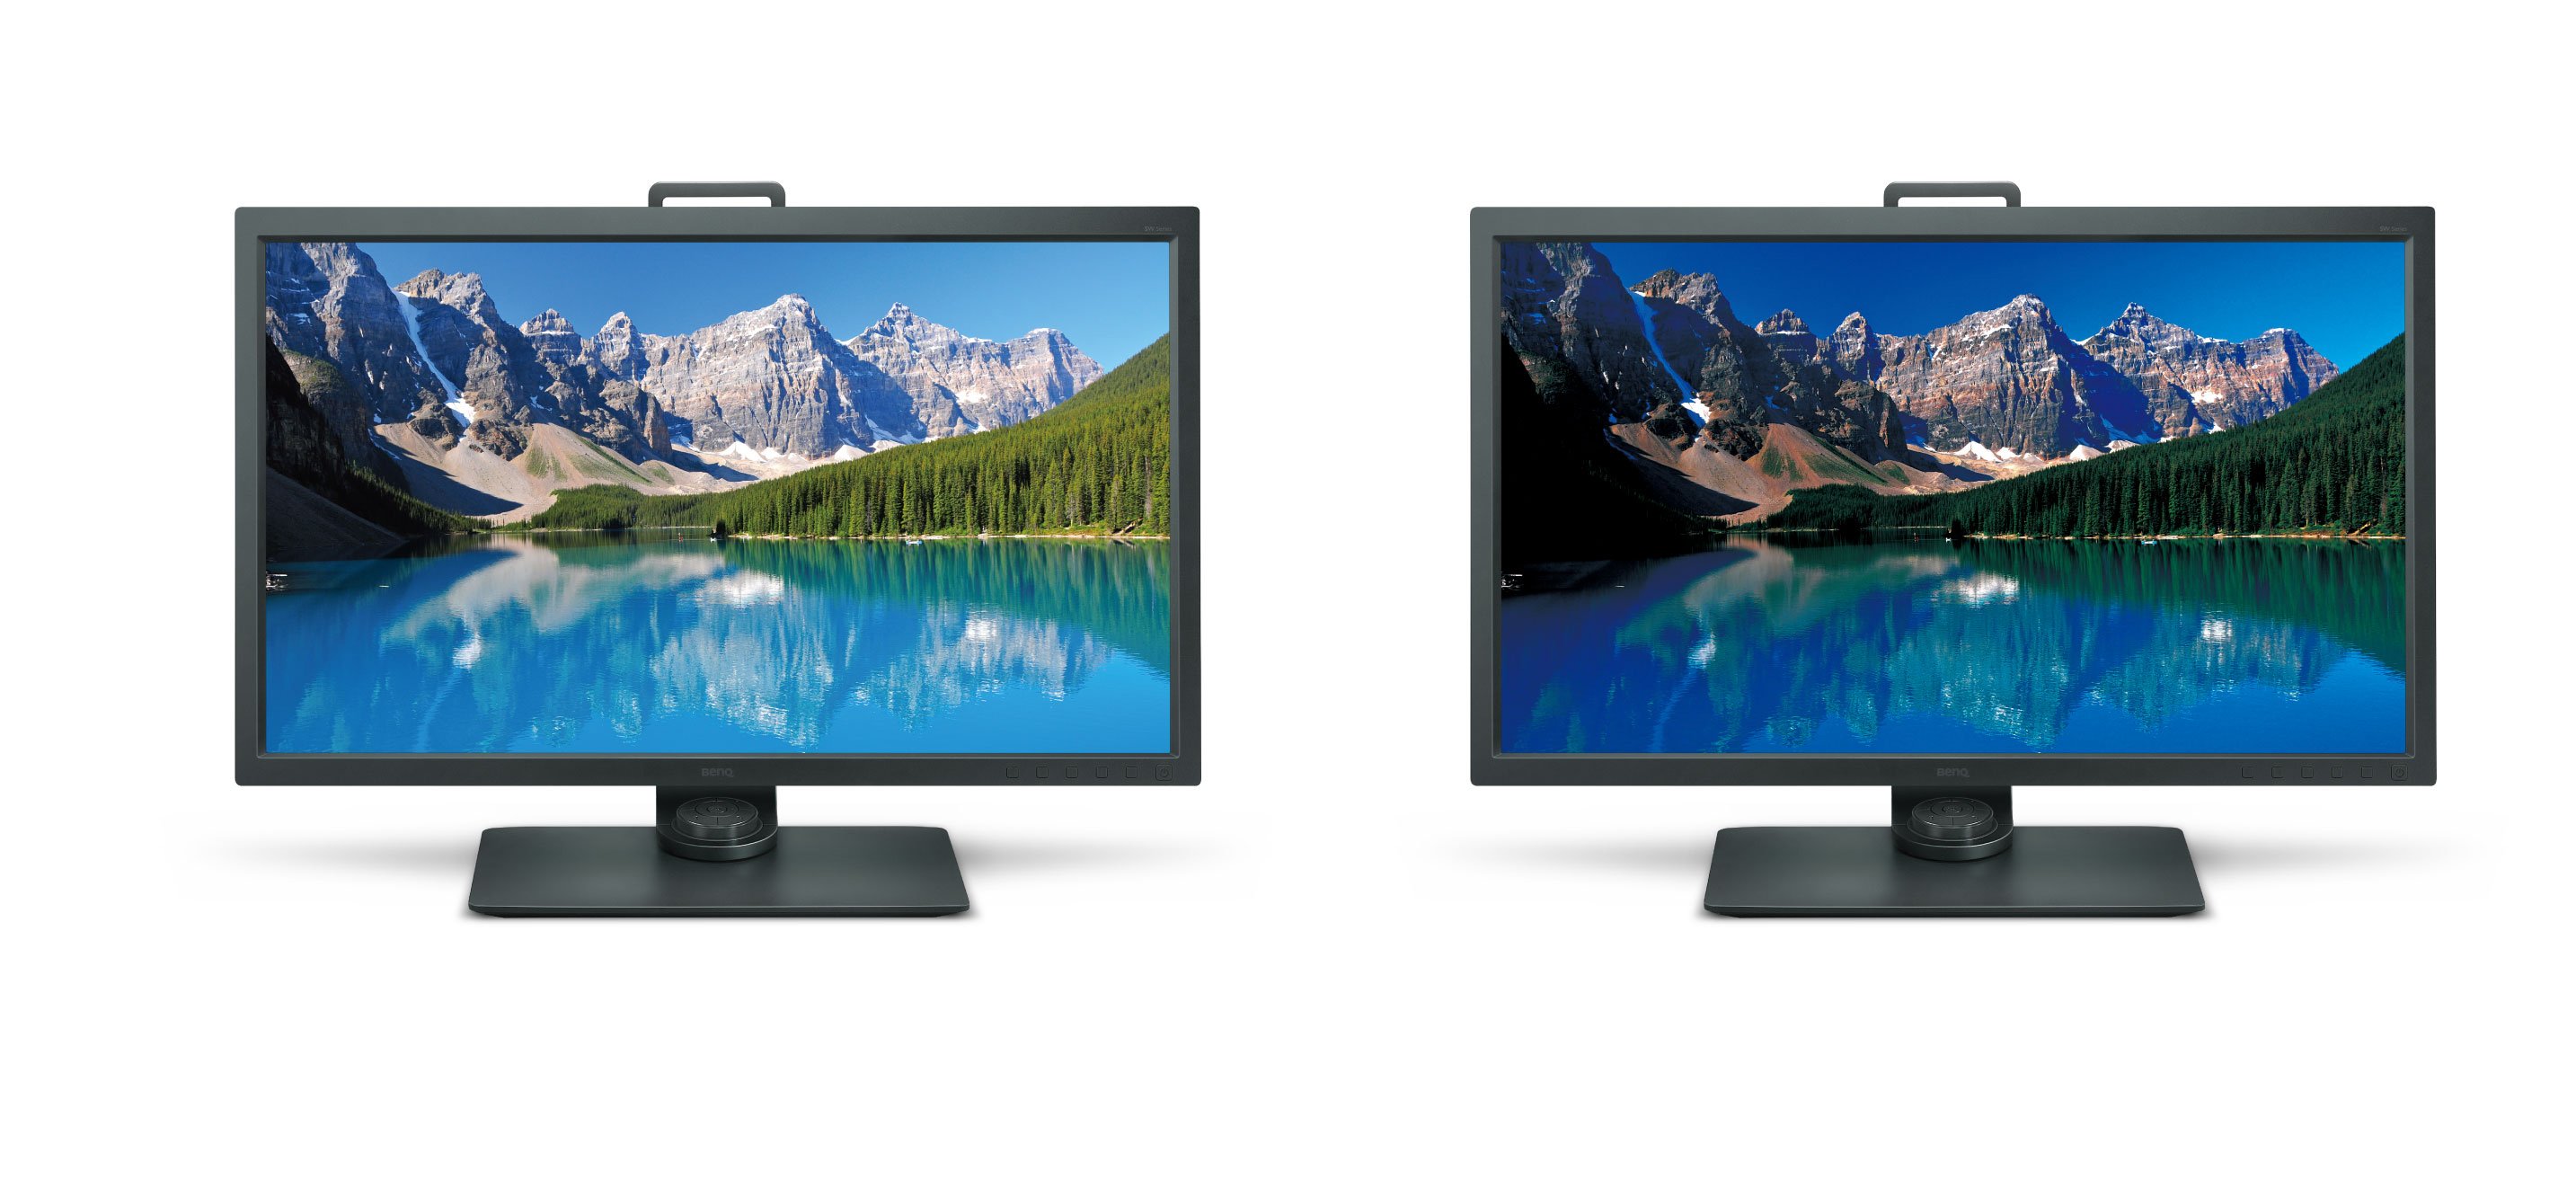 There are different colors of the scene showing mountain, lake and forest on same kind of devices.